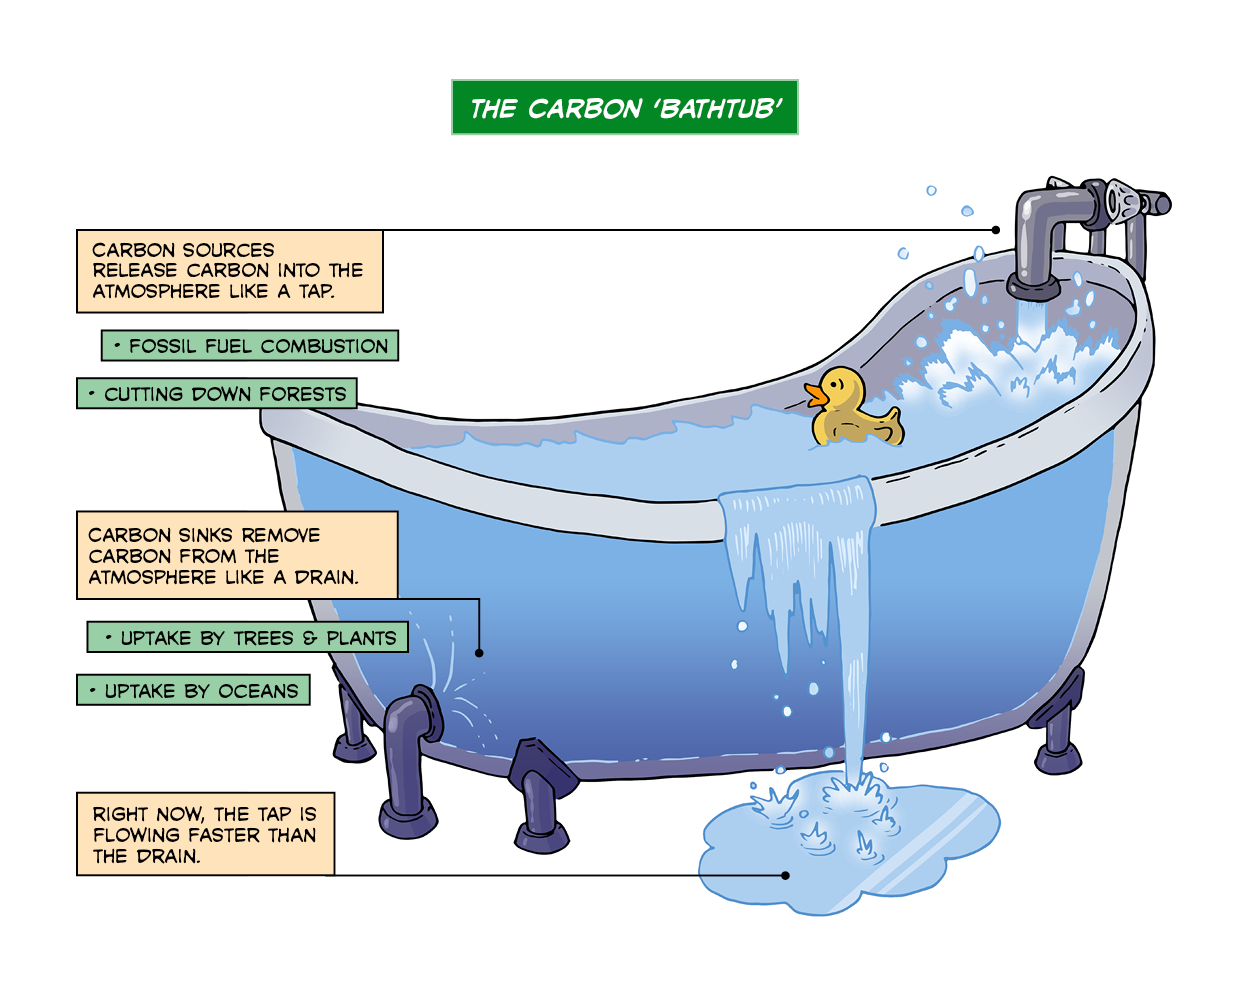 Carbon sources and sinks can be depicted using a bathtub and water